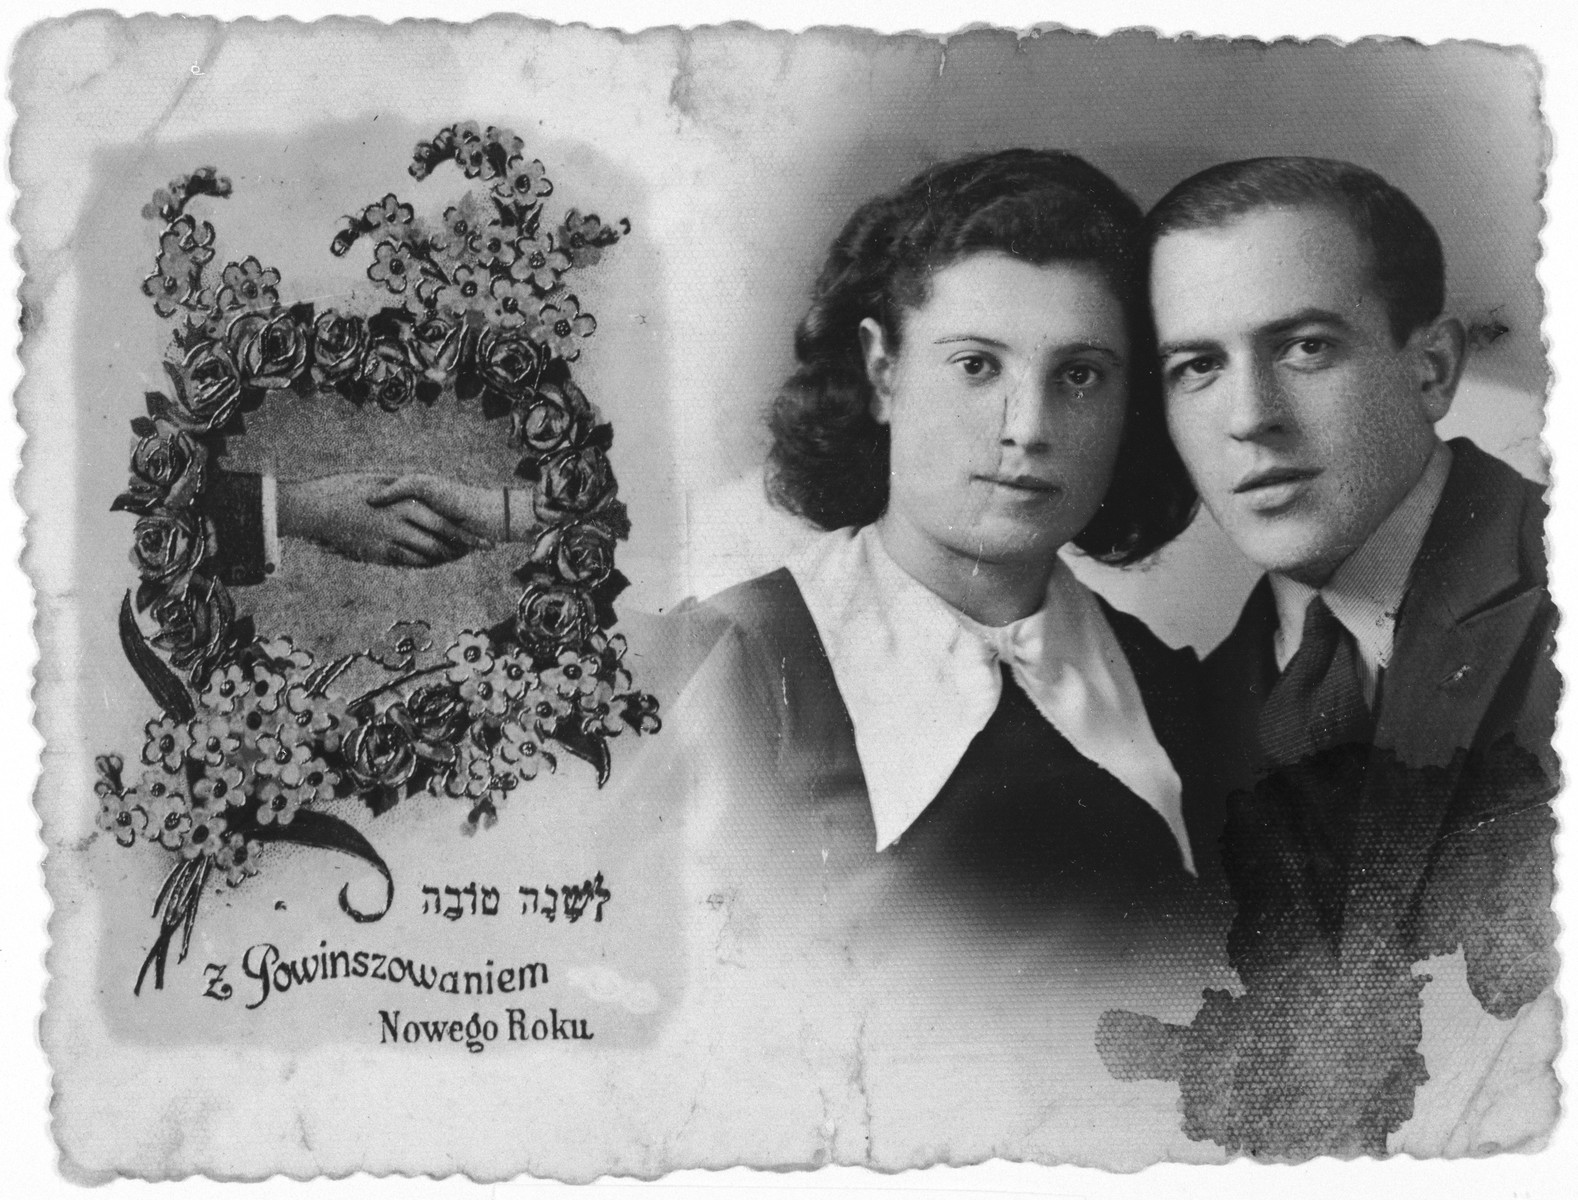 Jewish New Year card sent by Gershon and Masha Hirszfeld to their